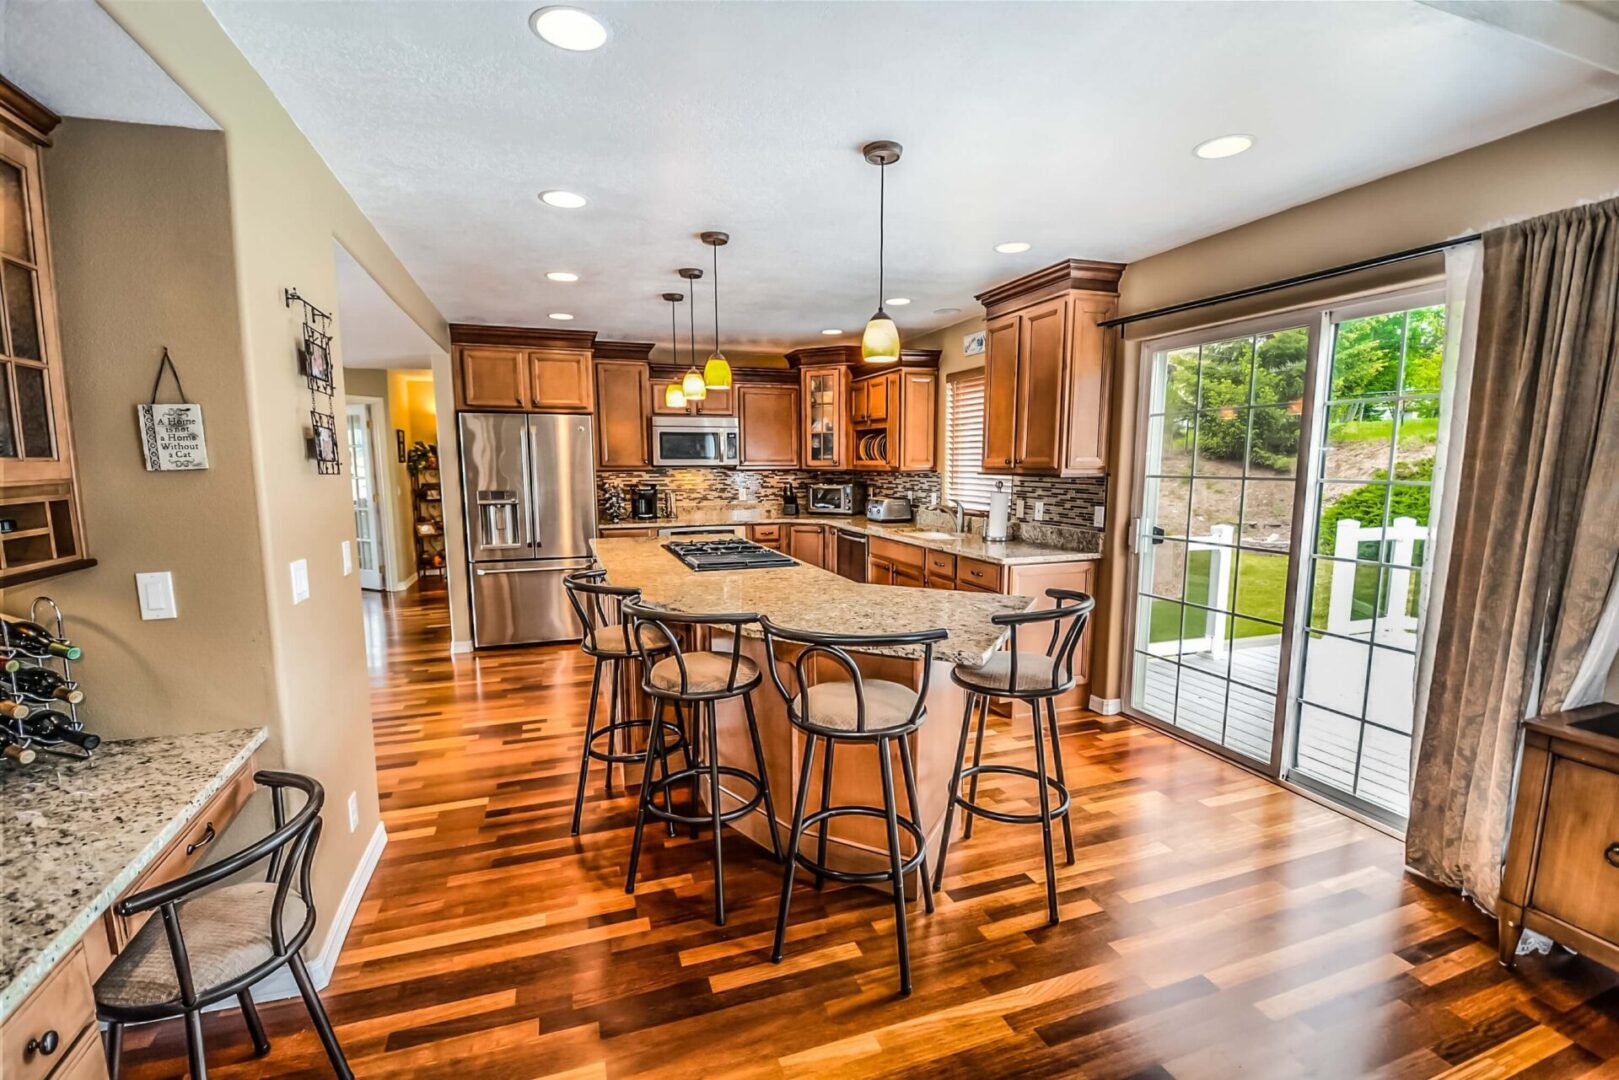 Hardwood flooring and rich brown wood cabinets give added luxury to showcase kitchen